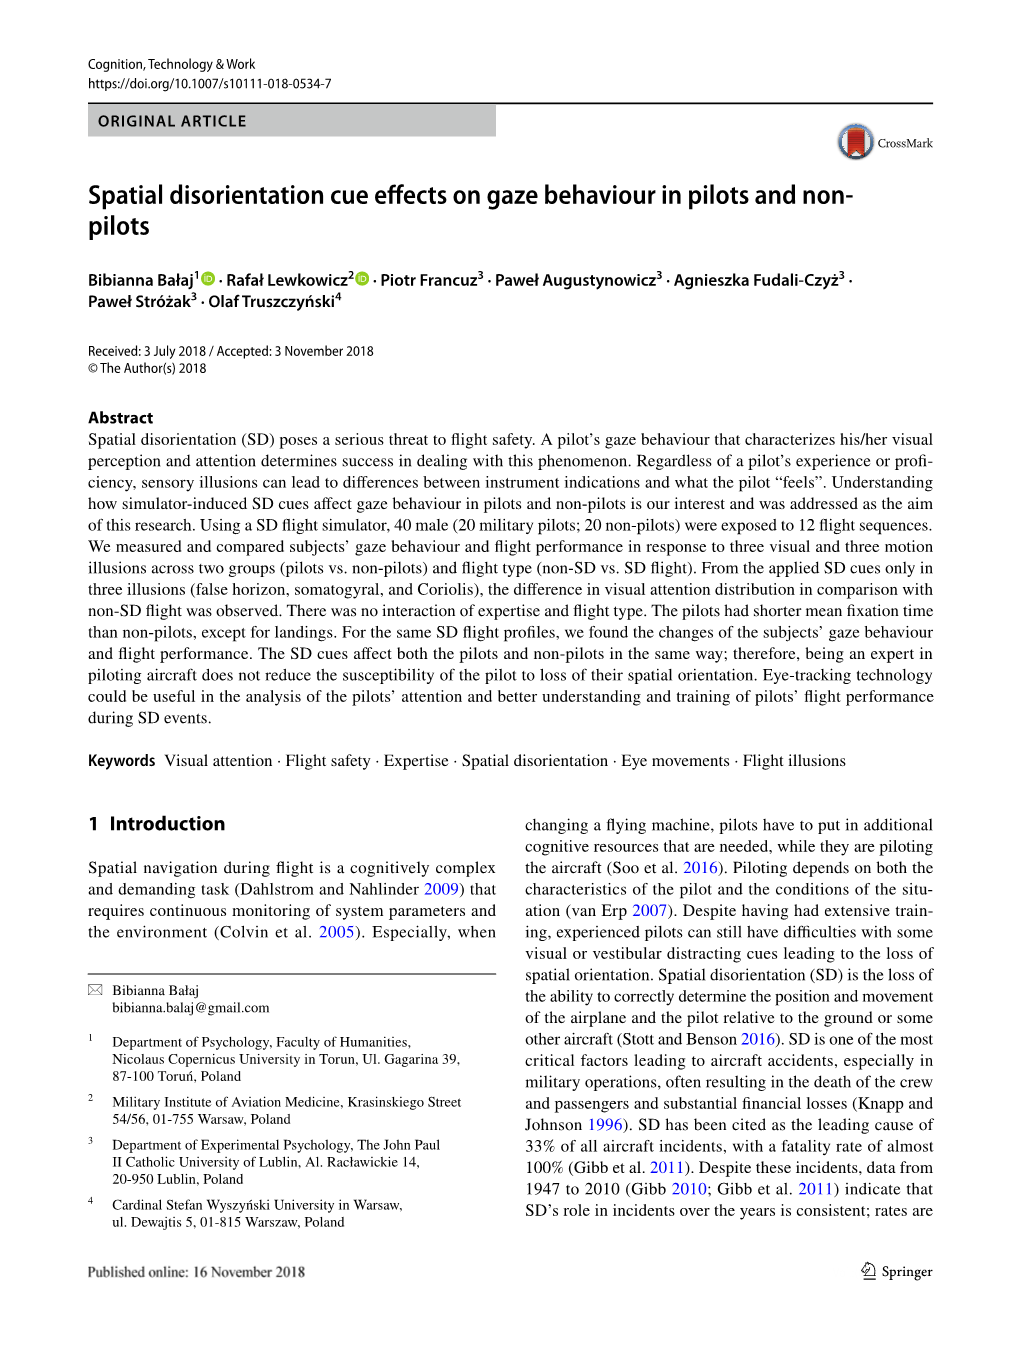 Spatial Disorientation Cue Effects on Gaze Behaviour in Pilots and Non- Pilots